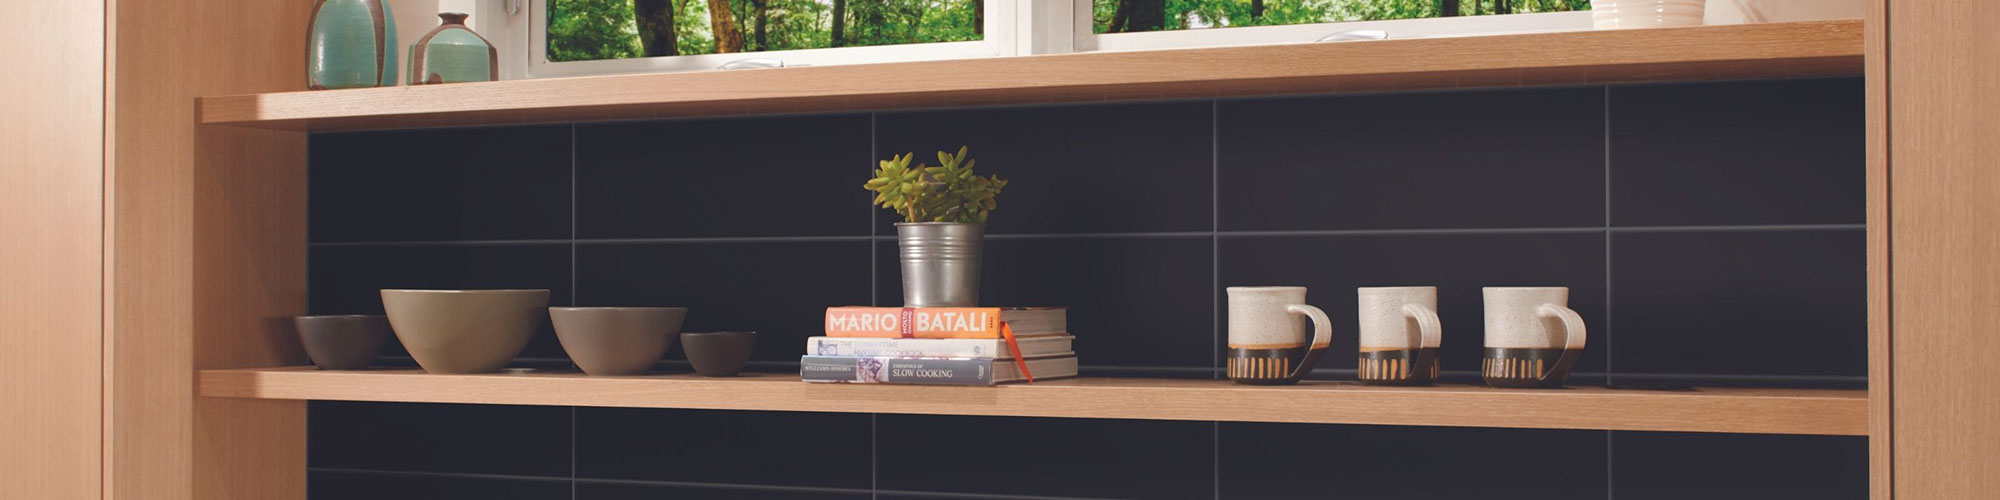 Kitchen cabinets with open shelves, black tile backsplash, bowls, cups, and a small potted plant.